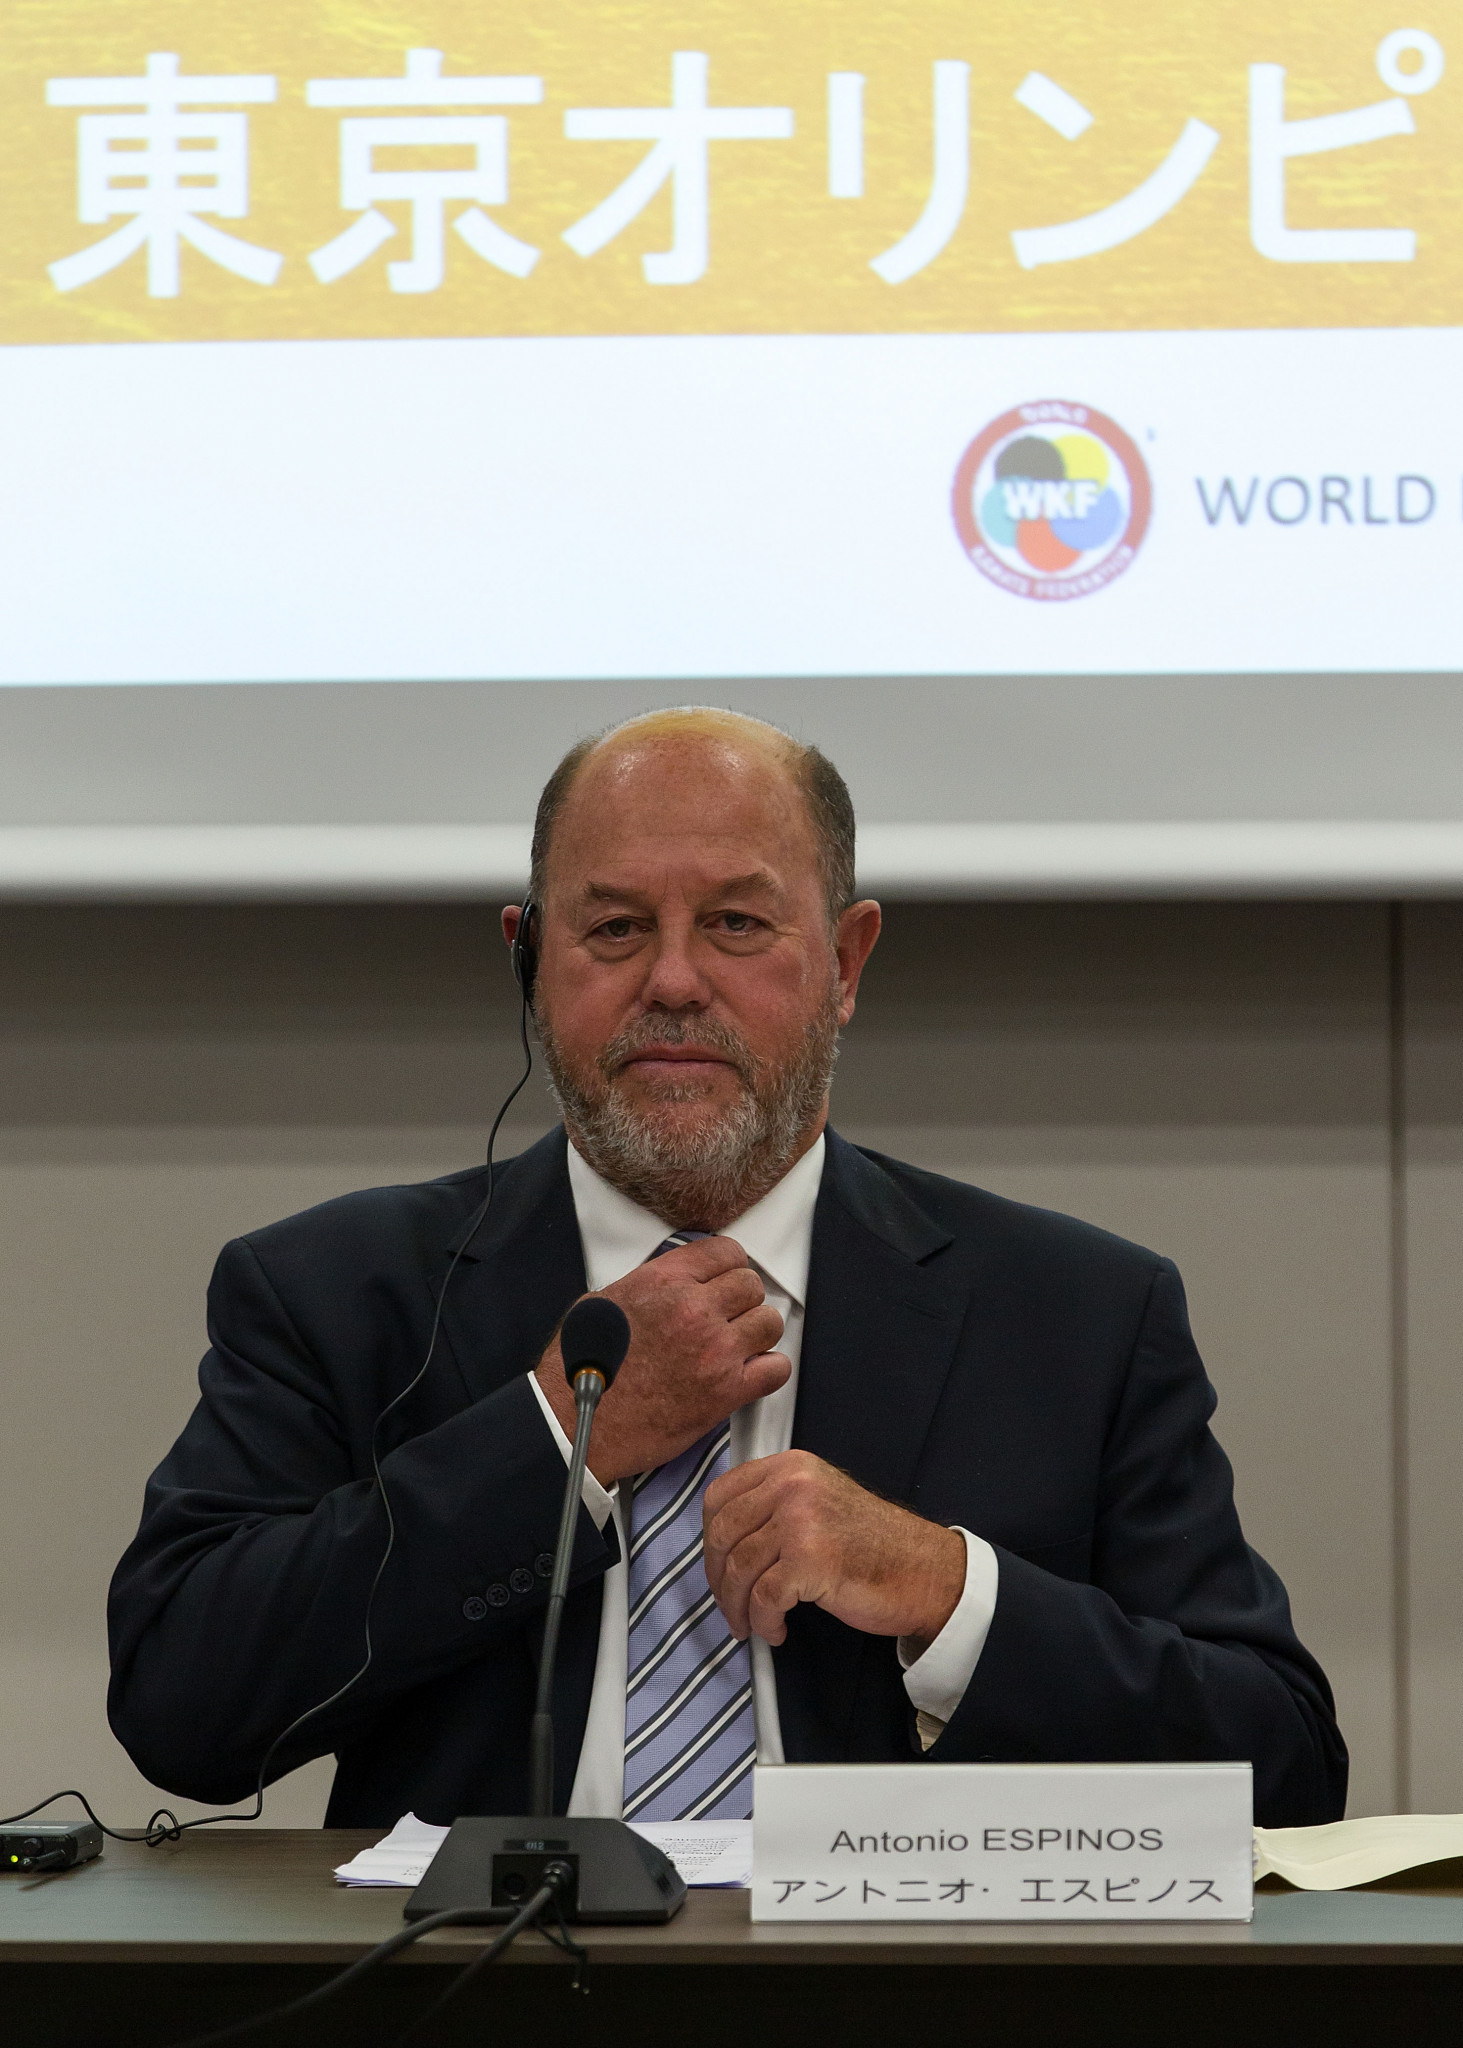 WKF President Antonio Espinós claimed the reasoning behind karate's exclusion from Paris 2024 was 